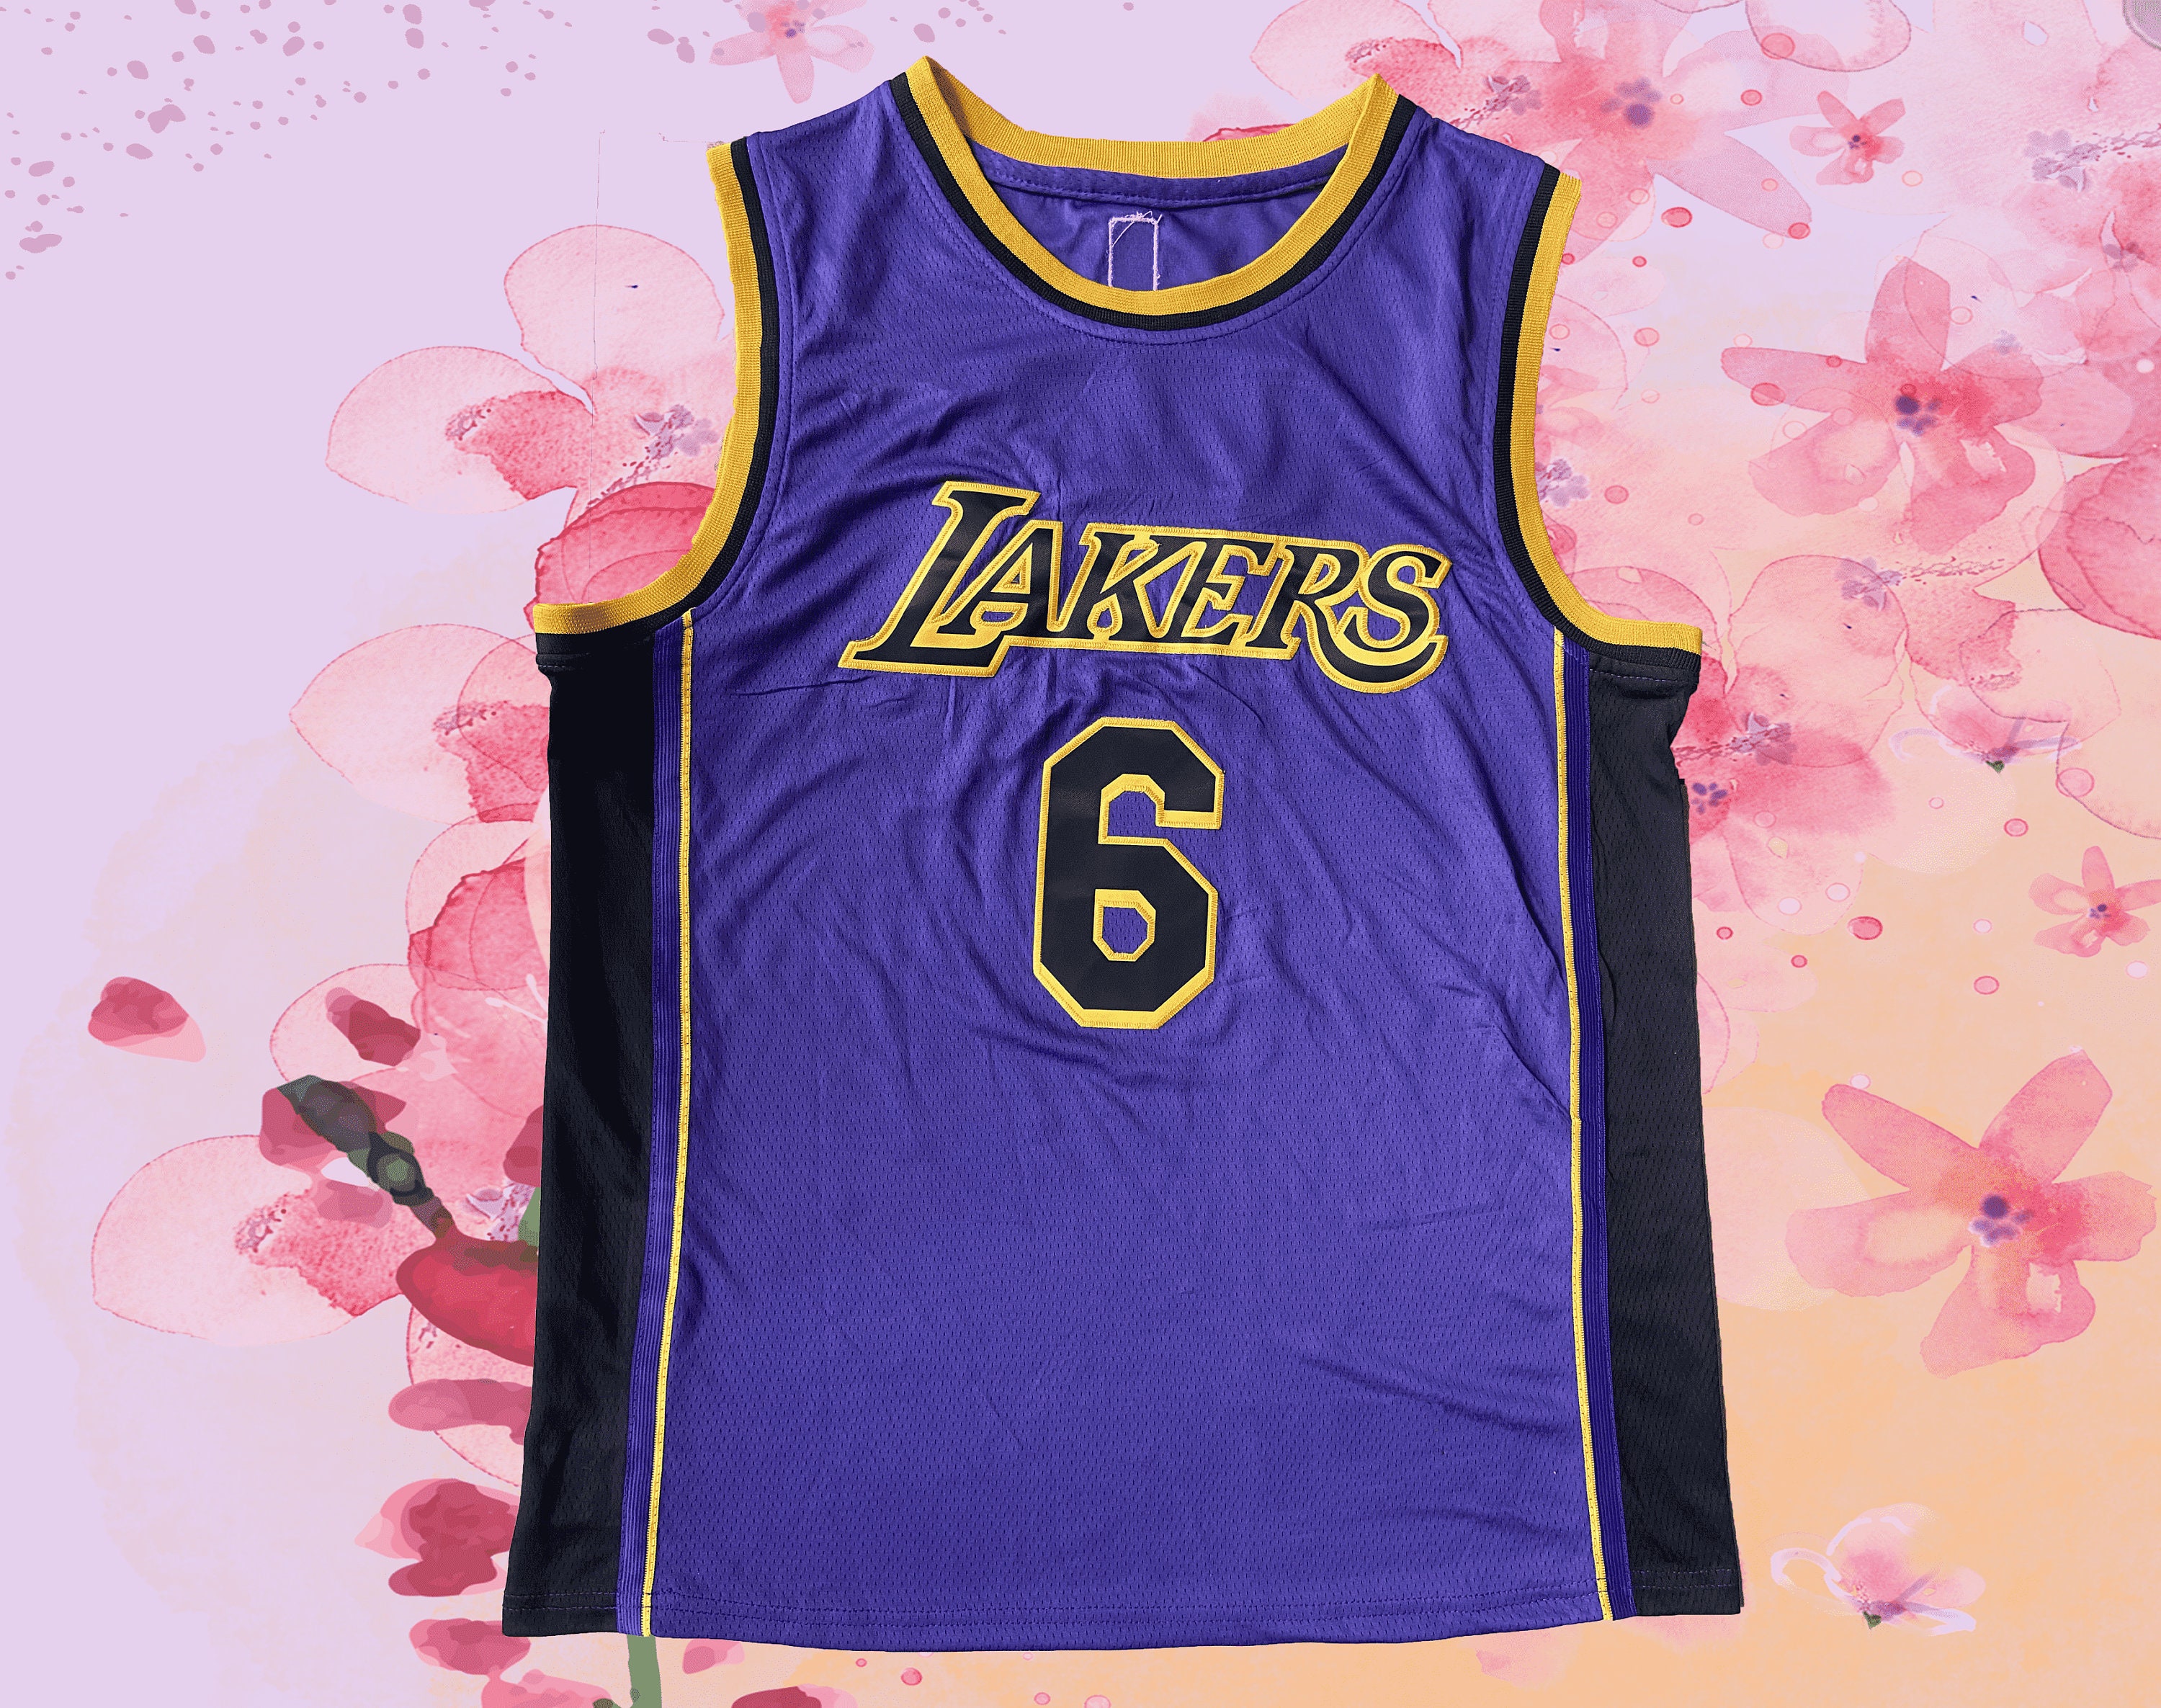 LeBron James Los Angeles Lakers 6 Jersey Youth Basketball